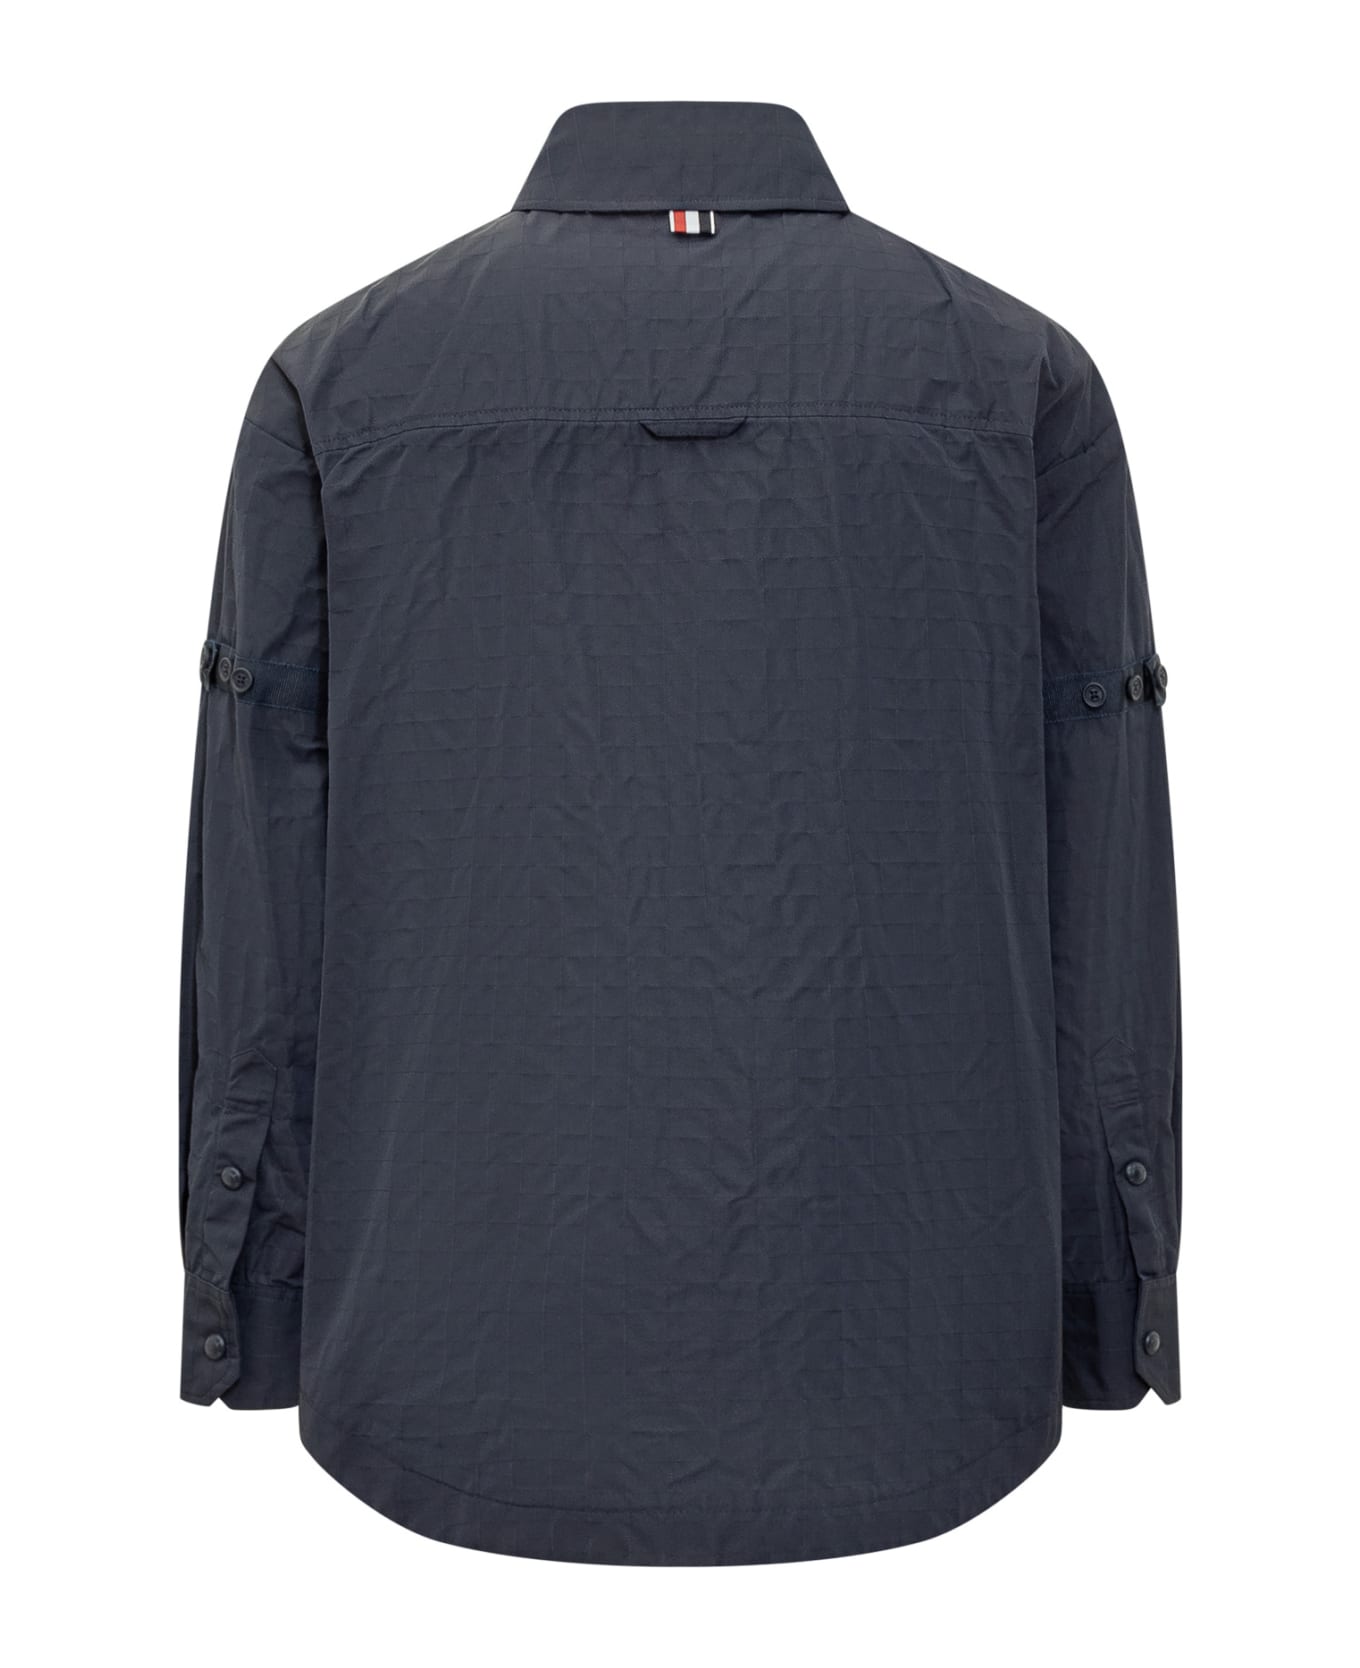 Thom Browne 'snap Front' Overshirt - NAVY